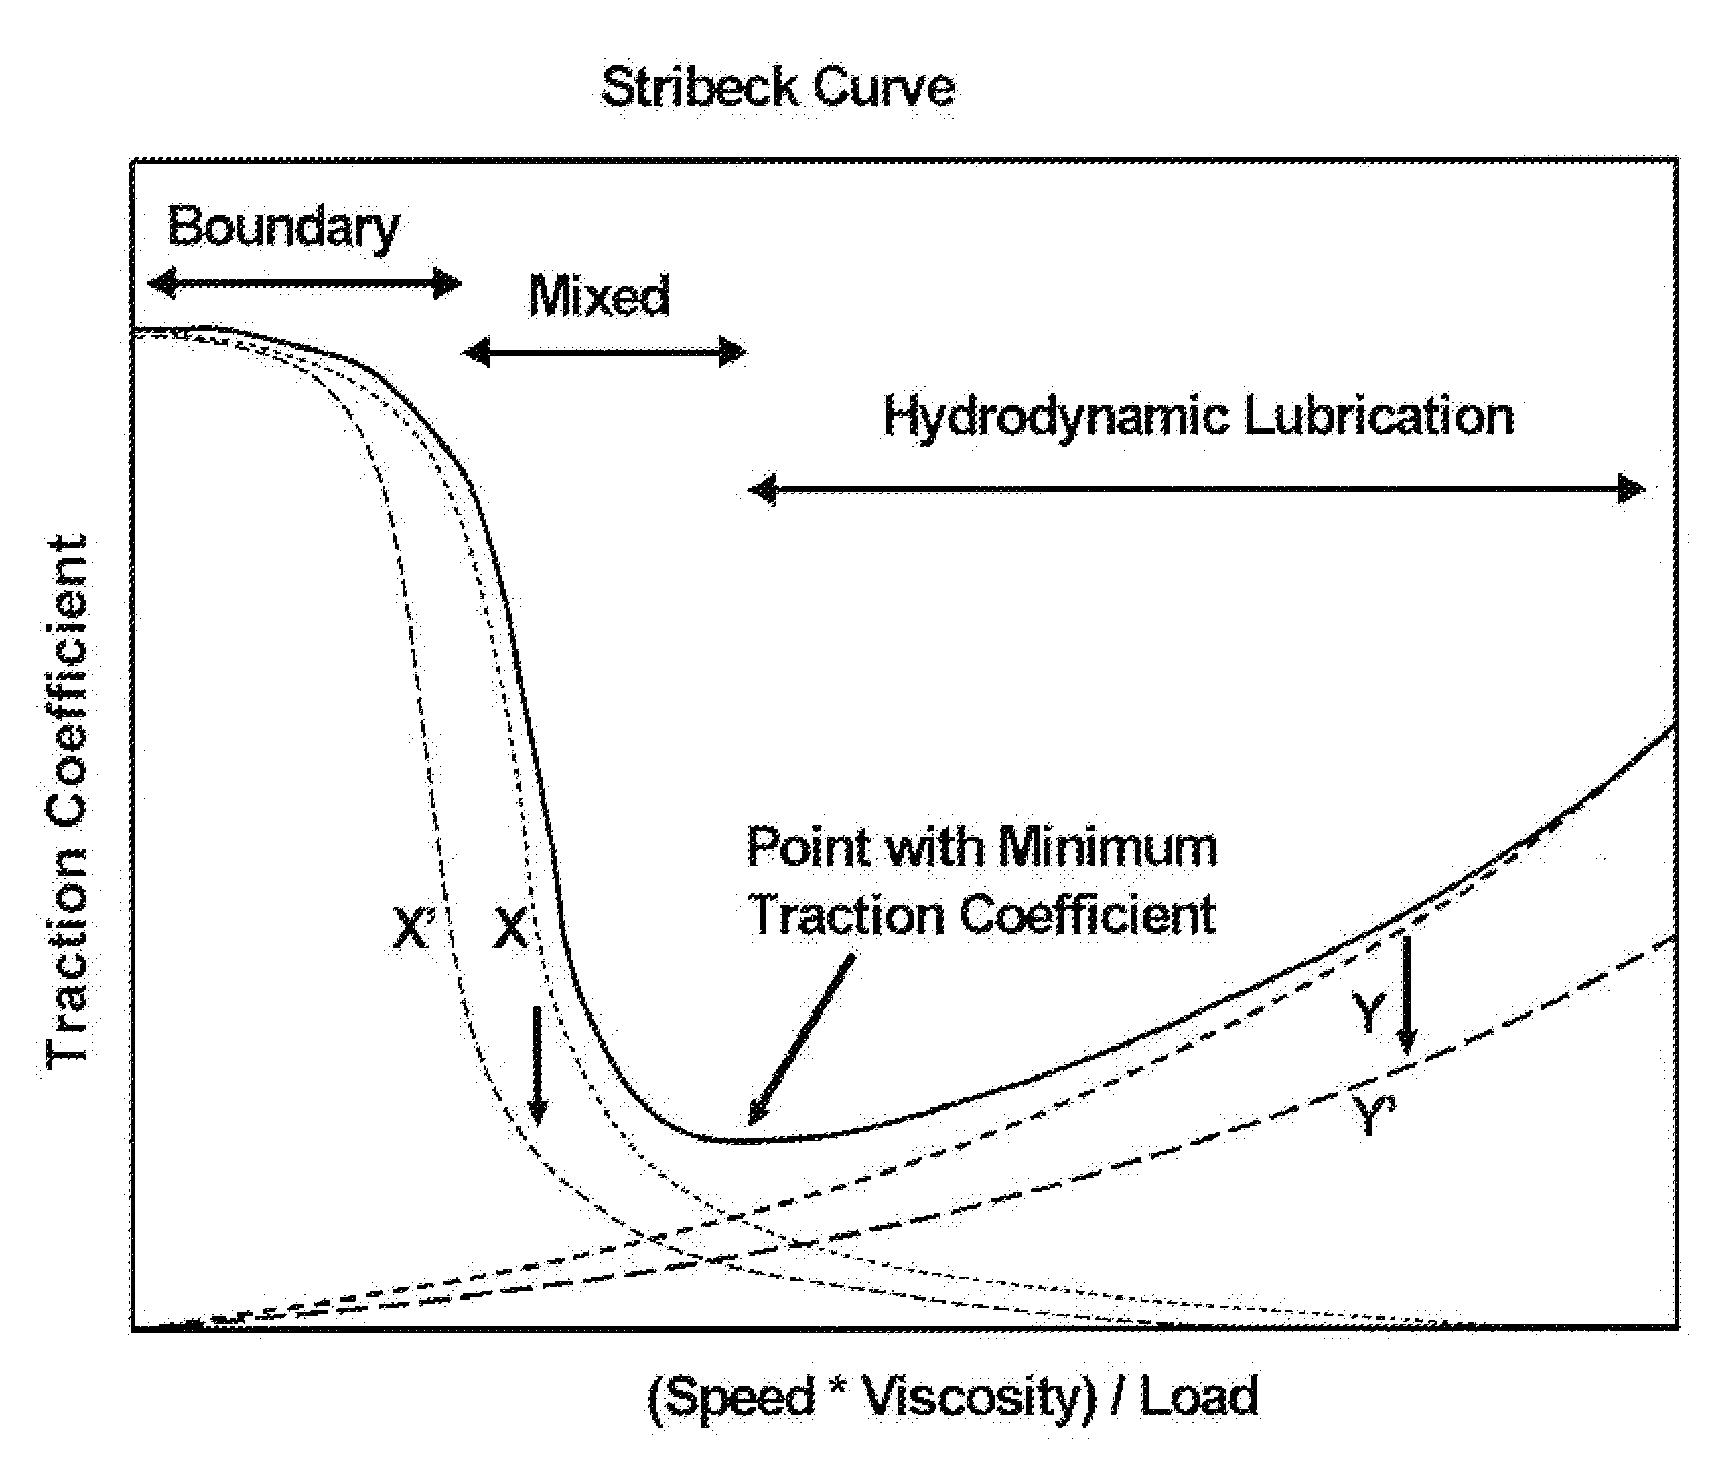 Traction coefficient reducing lubricating oil composition